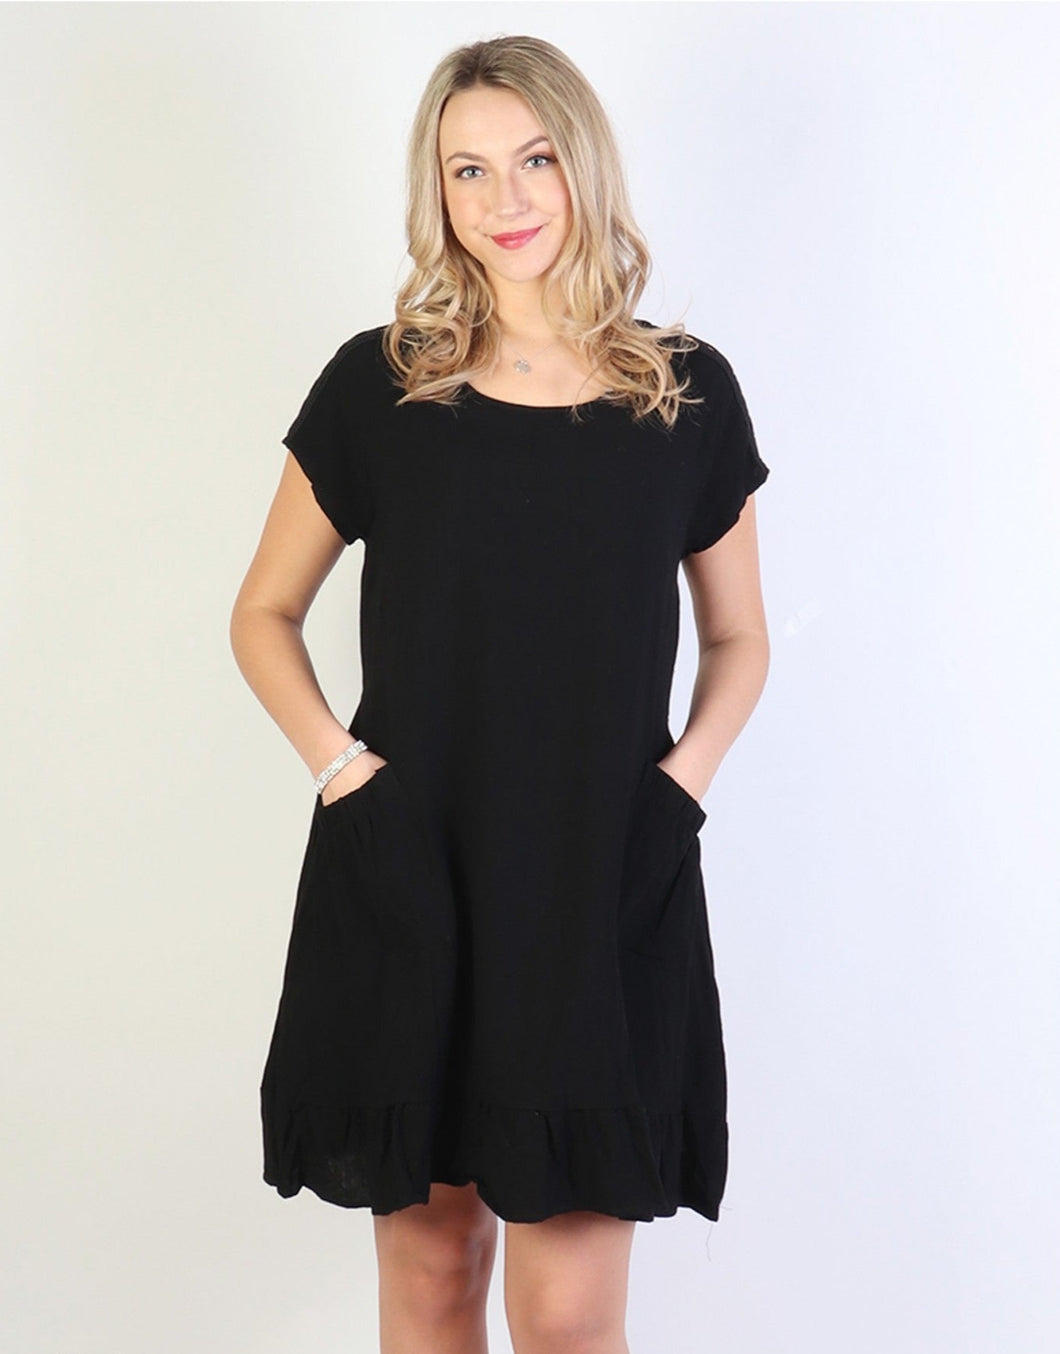 Dress - Short Sleeve with Pockets, Flounced Edge, Circle Cut-Out Shoulders & Tie Back - Black